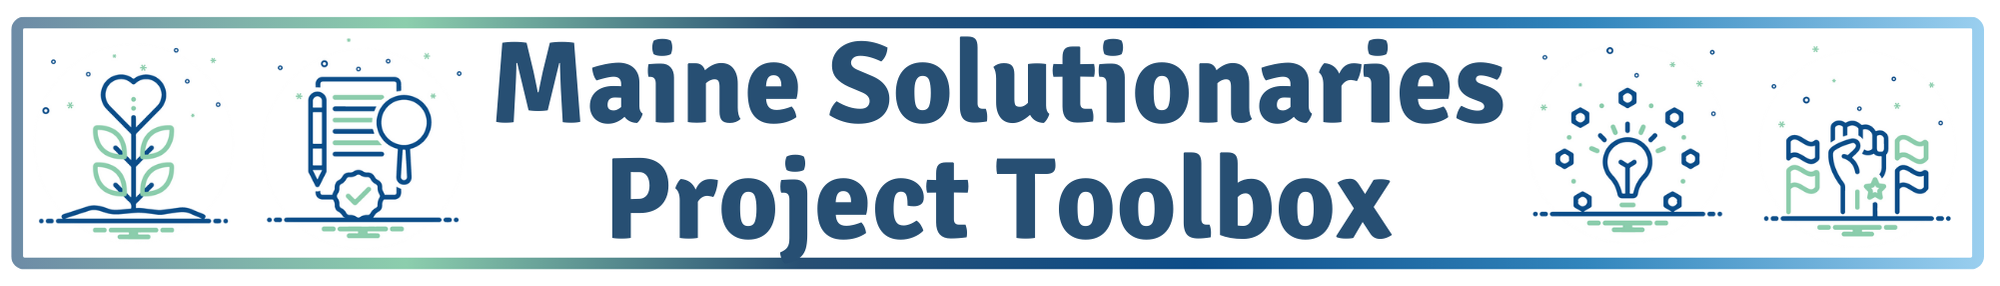 Maine Solutionaries Project toolbox banner